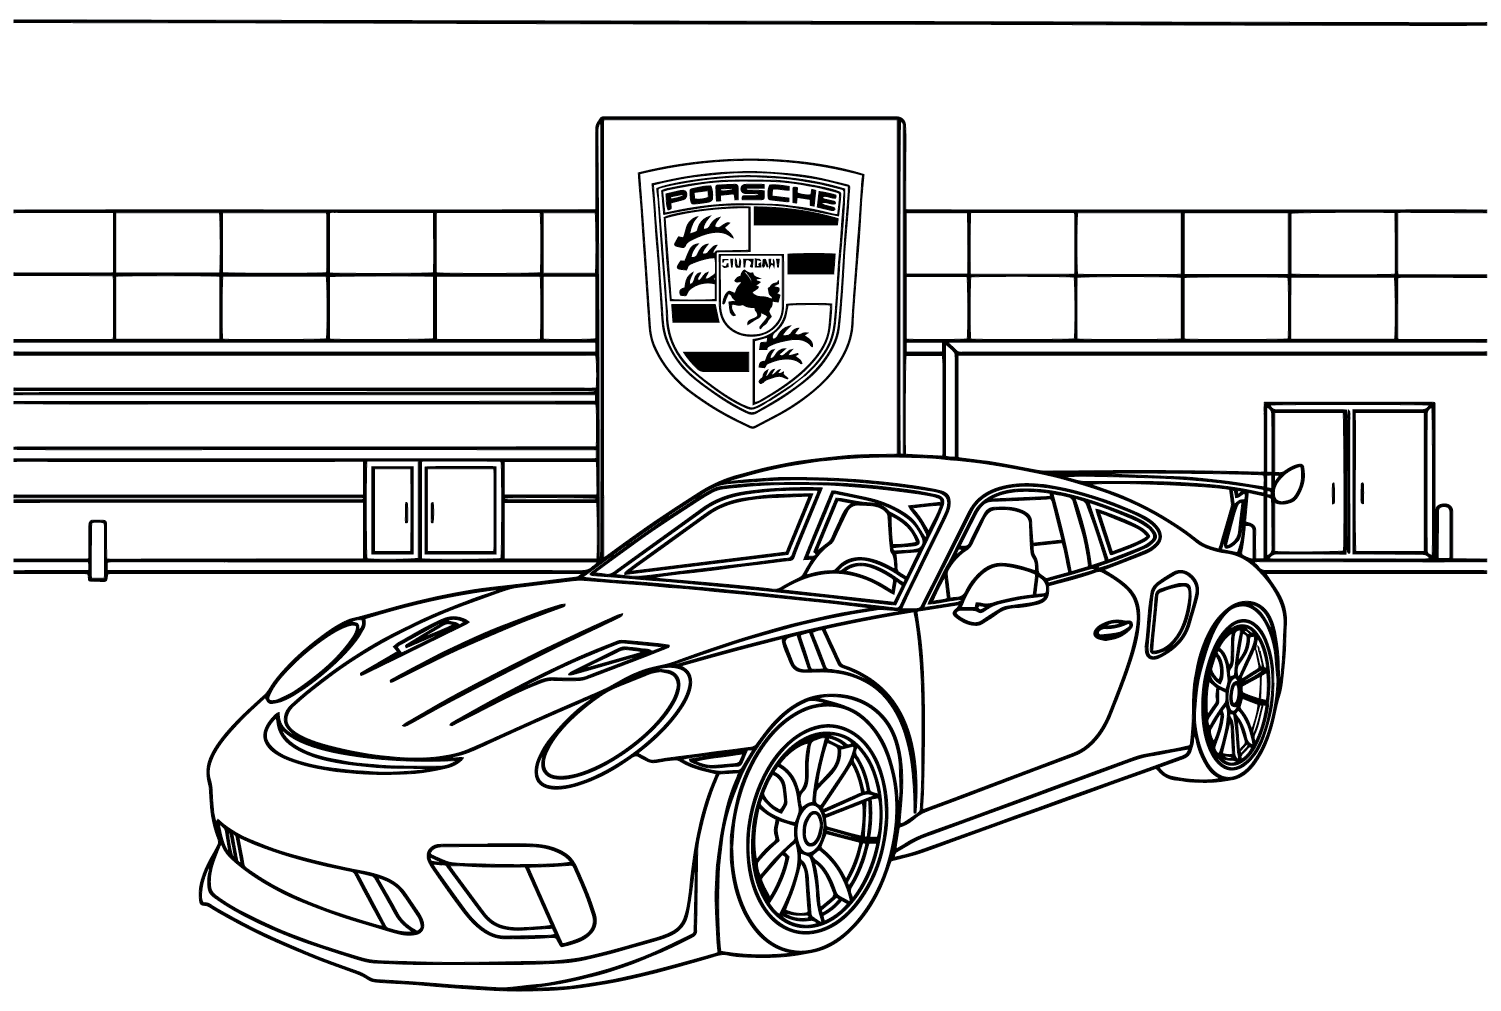 Porsche Coloring Pages to Download - Free Printable Coloring Pages